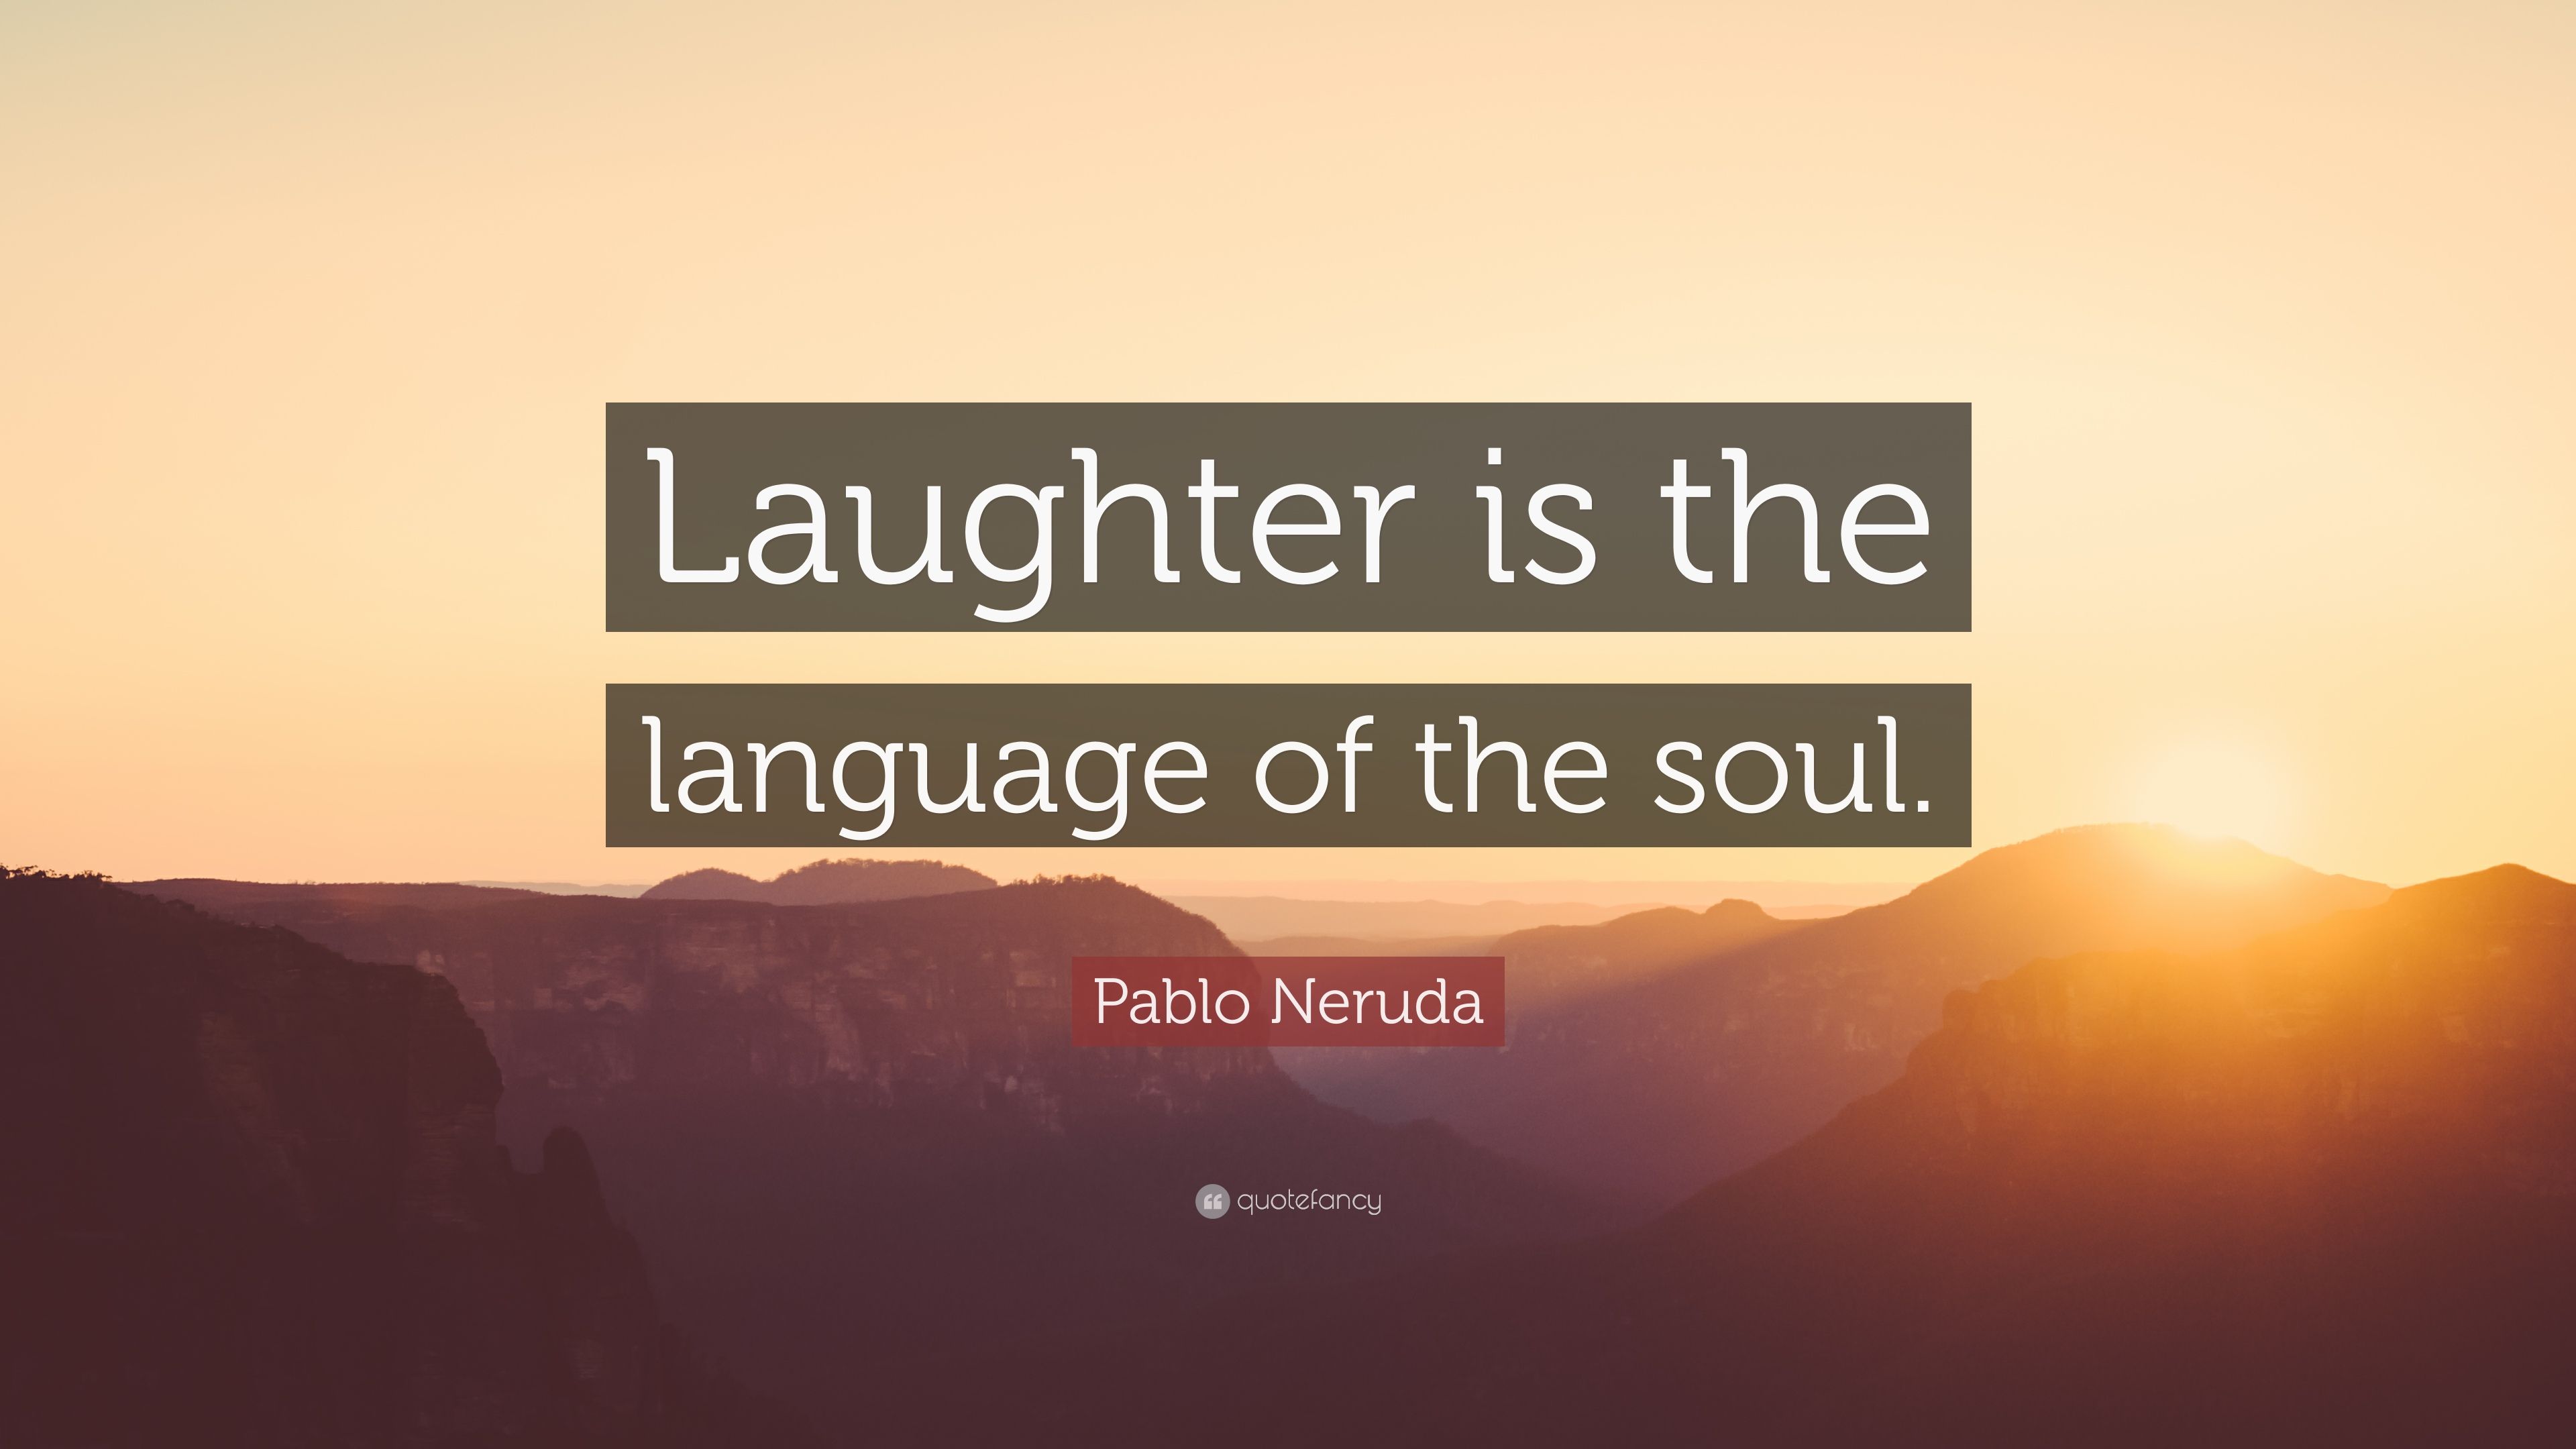 Pablo Neruda Quote: “Laughter is the language of the soul.” 25